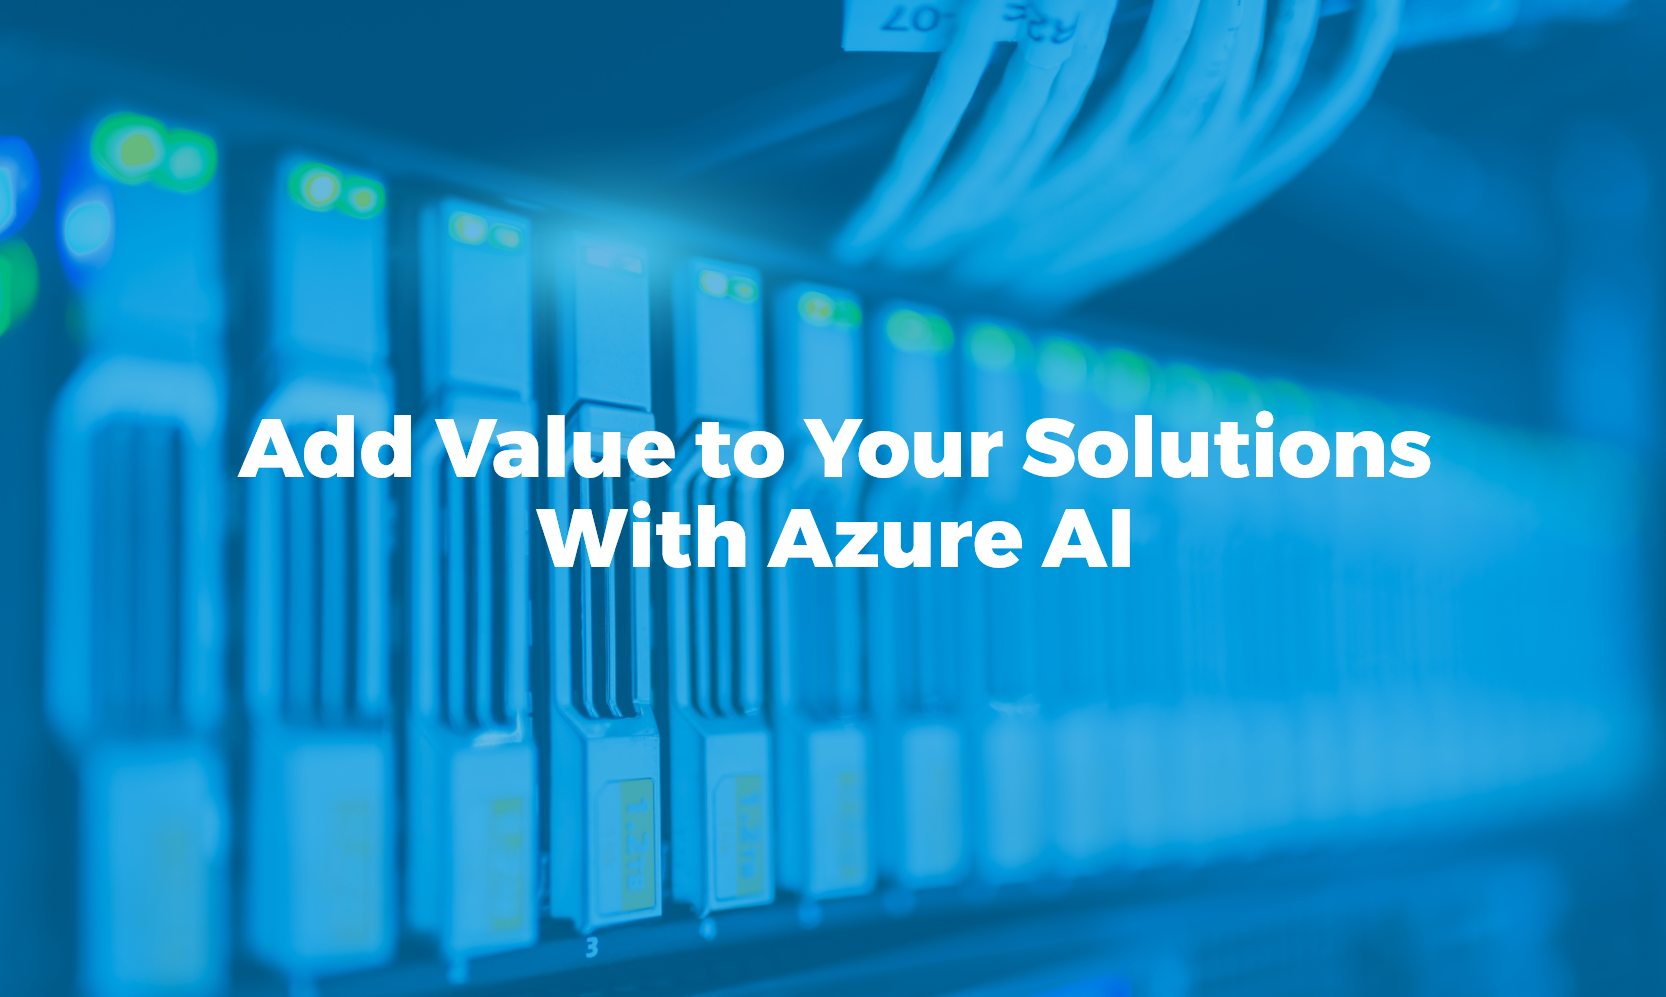 Bismart add value to your solutions with Azure AI